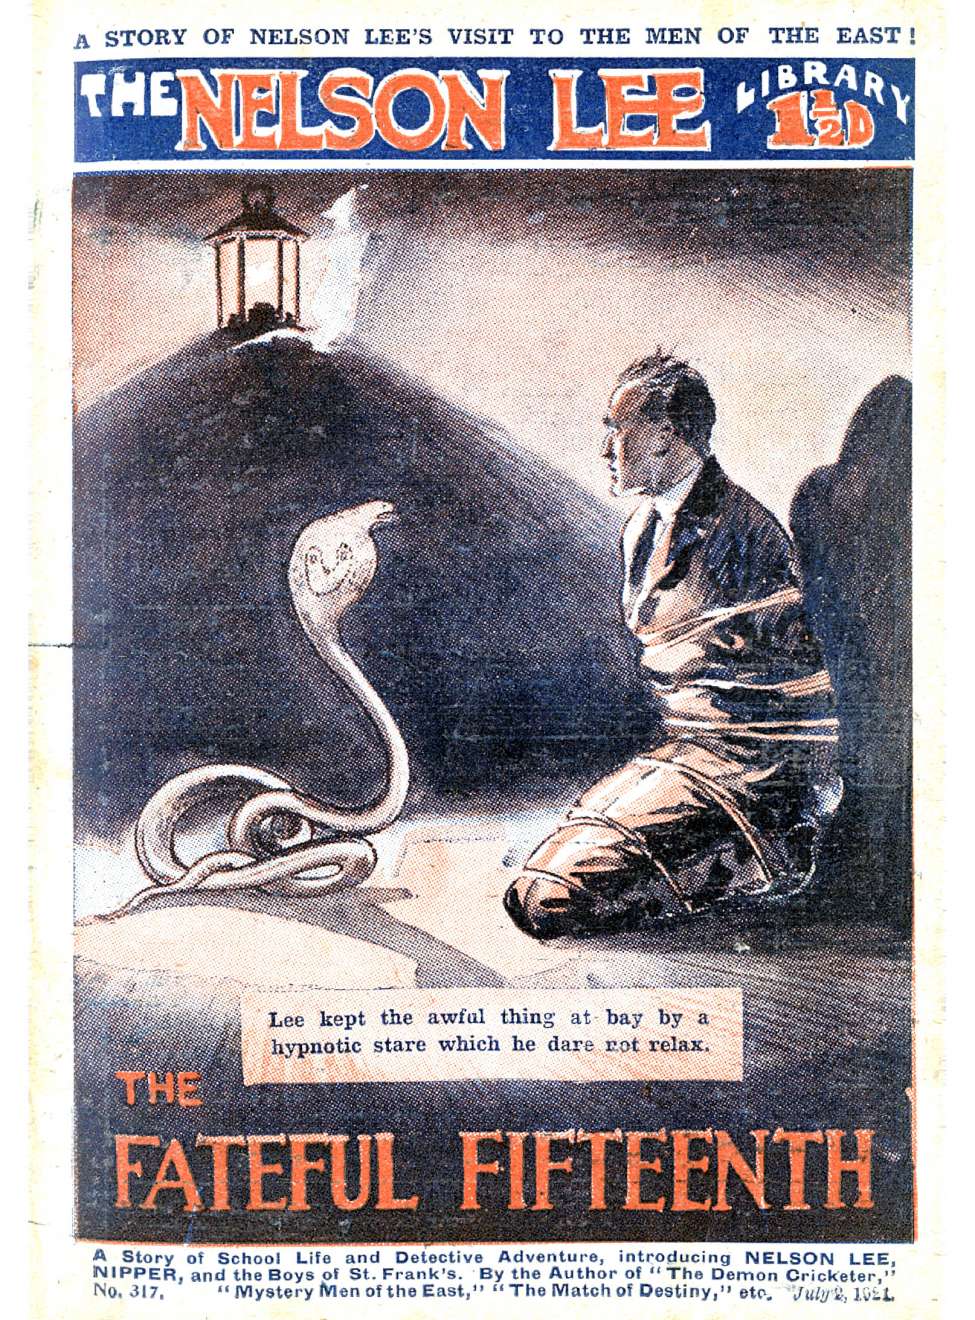 Book Cover For Nelson Lee Library s1 317 - The Fateful Fifteenth